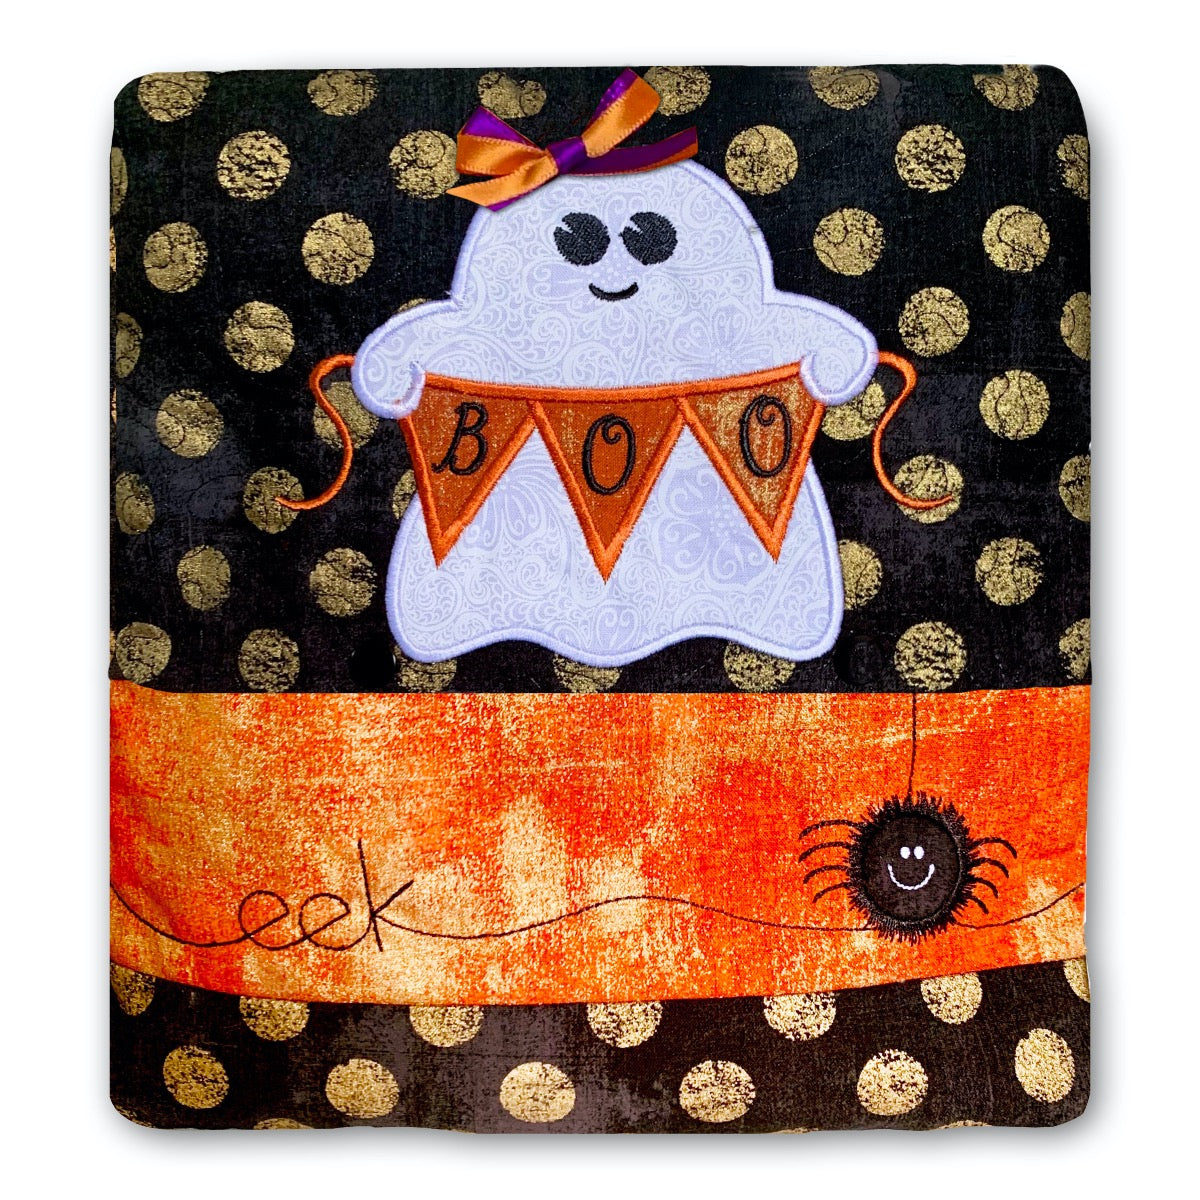 Boo Pillows In the Hoop Machine Embroidery Design Set